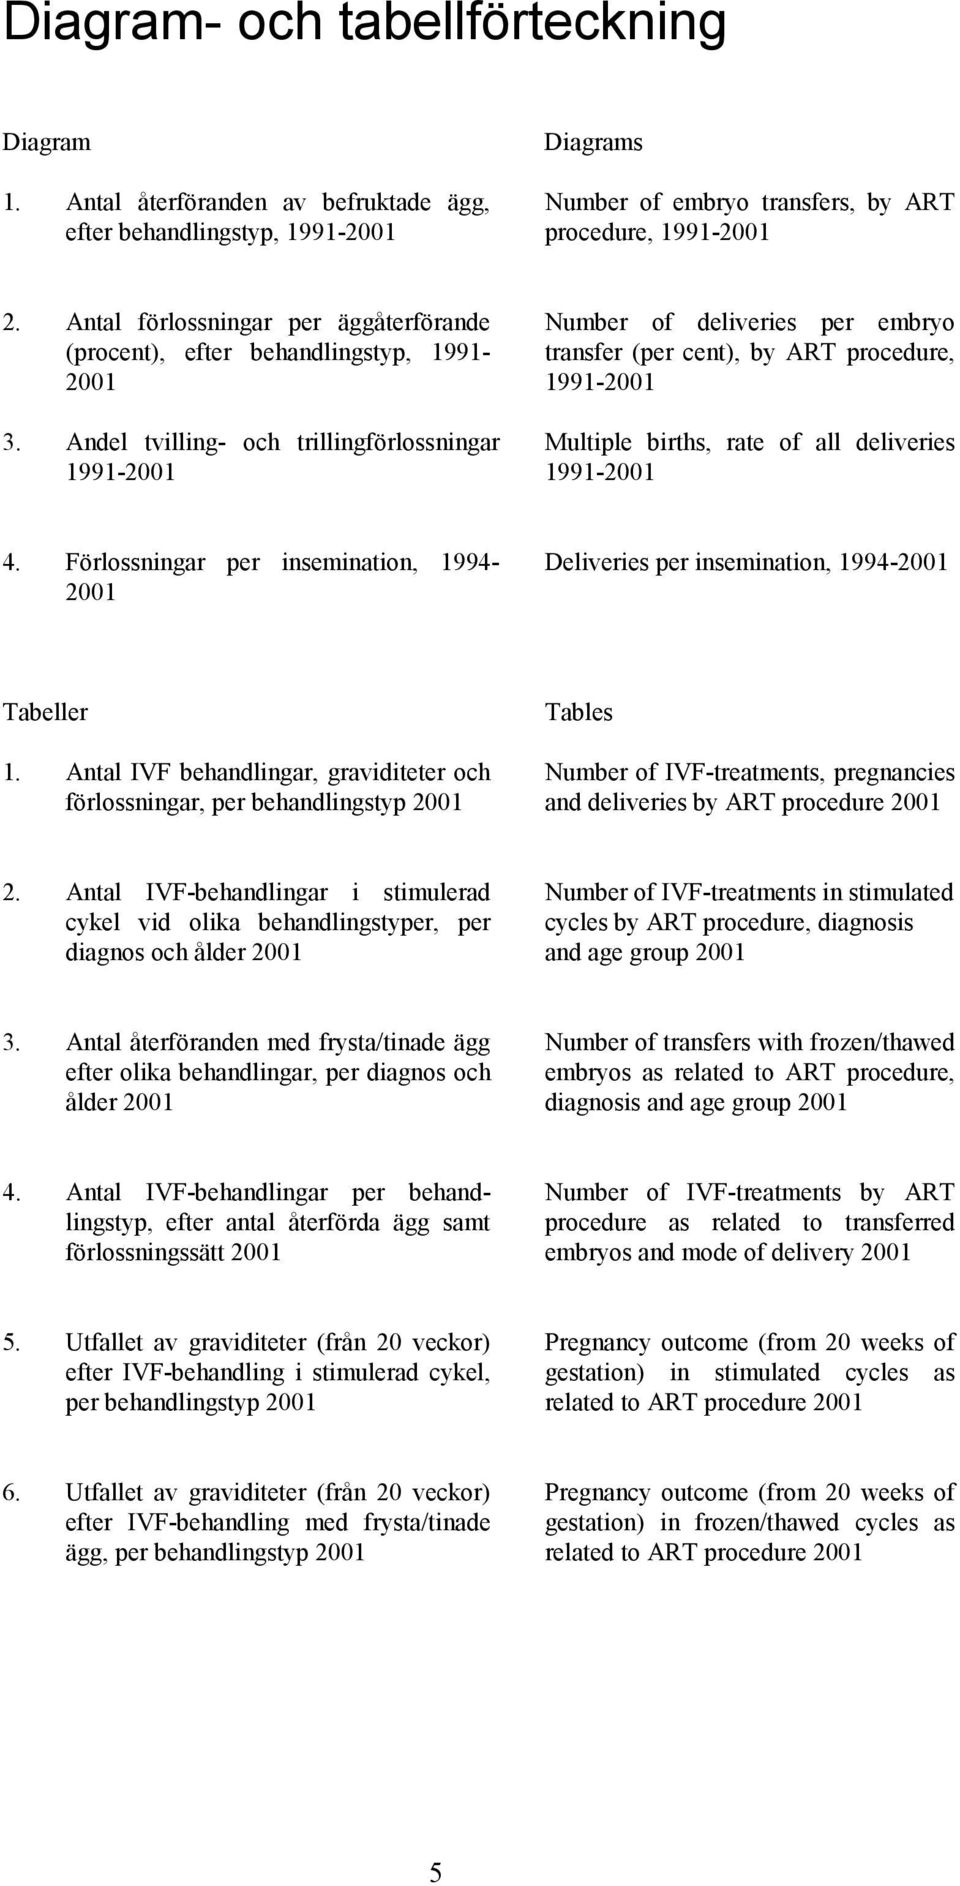 Andel tvilling- och trillingförlossningar 1991-2001 Number of deliveries per embryo transfer (per cent), by ART procedure, 1991-2001 Multiple births, rate of all deliveries 1991-2001 4.